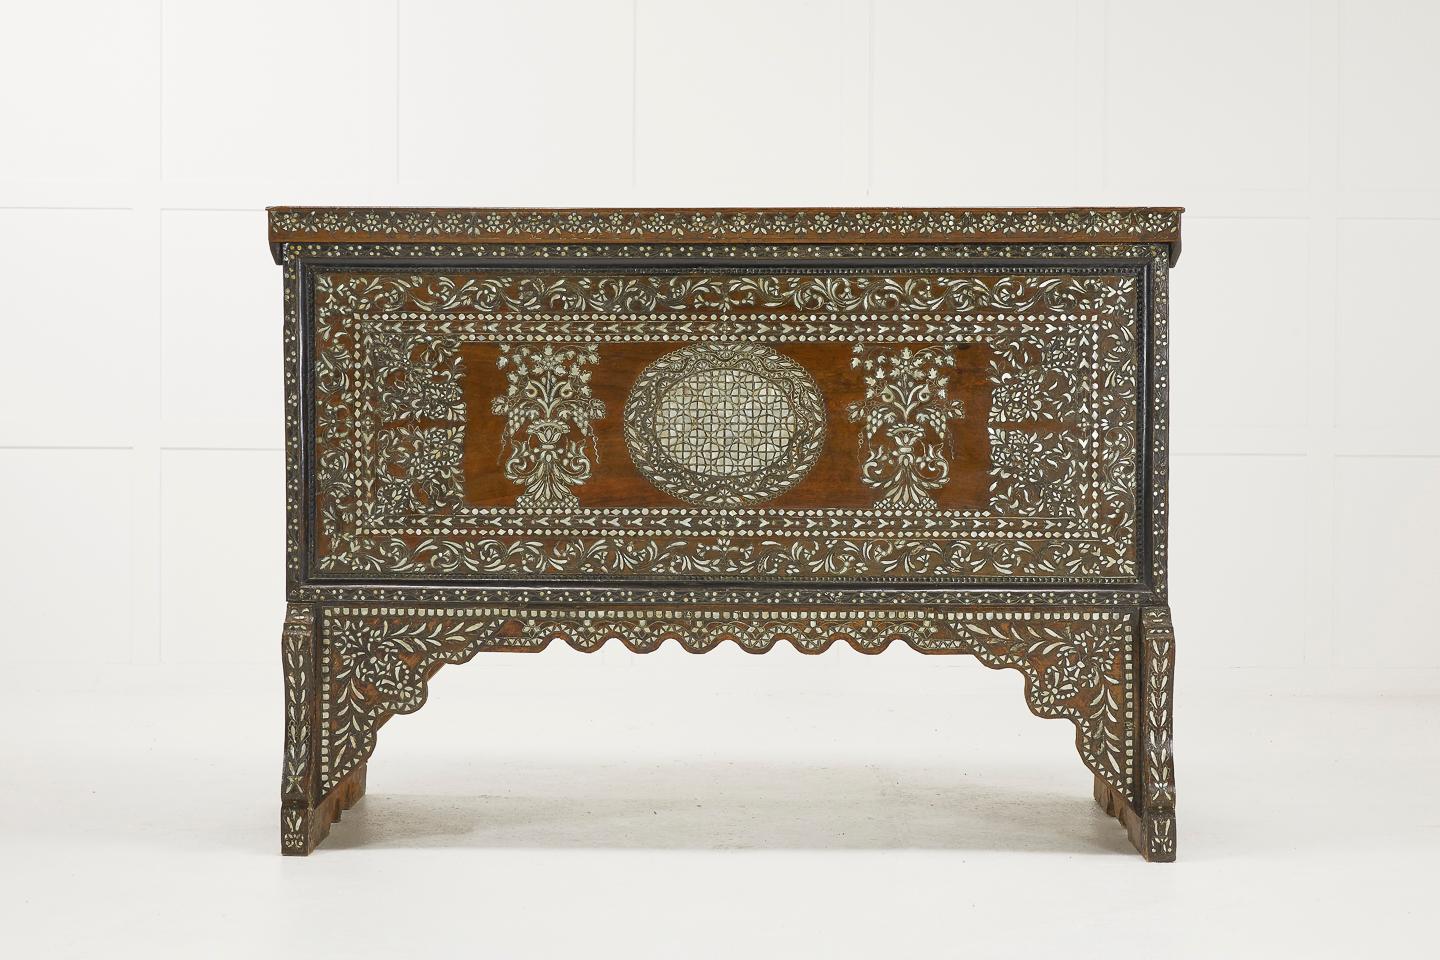 Impressive, grand scale 19th century Syrian dowry wedding chest, beautifully inlaid with mother of pearl and lead wire. A truly stunning example.